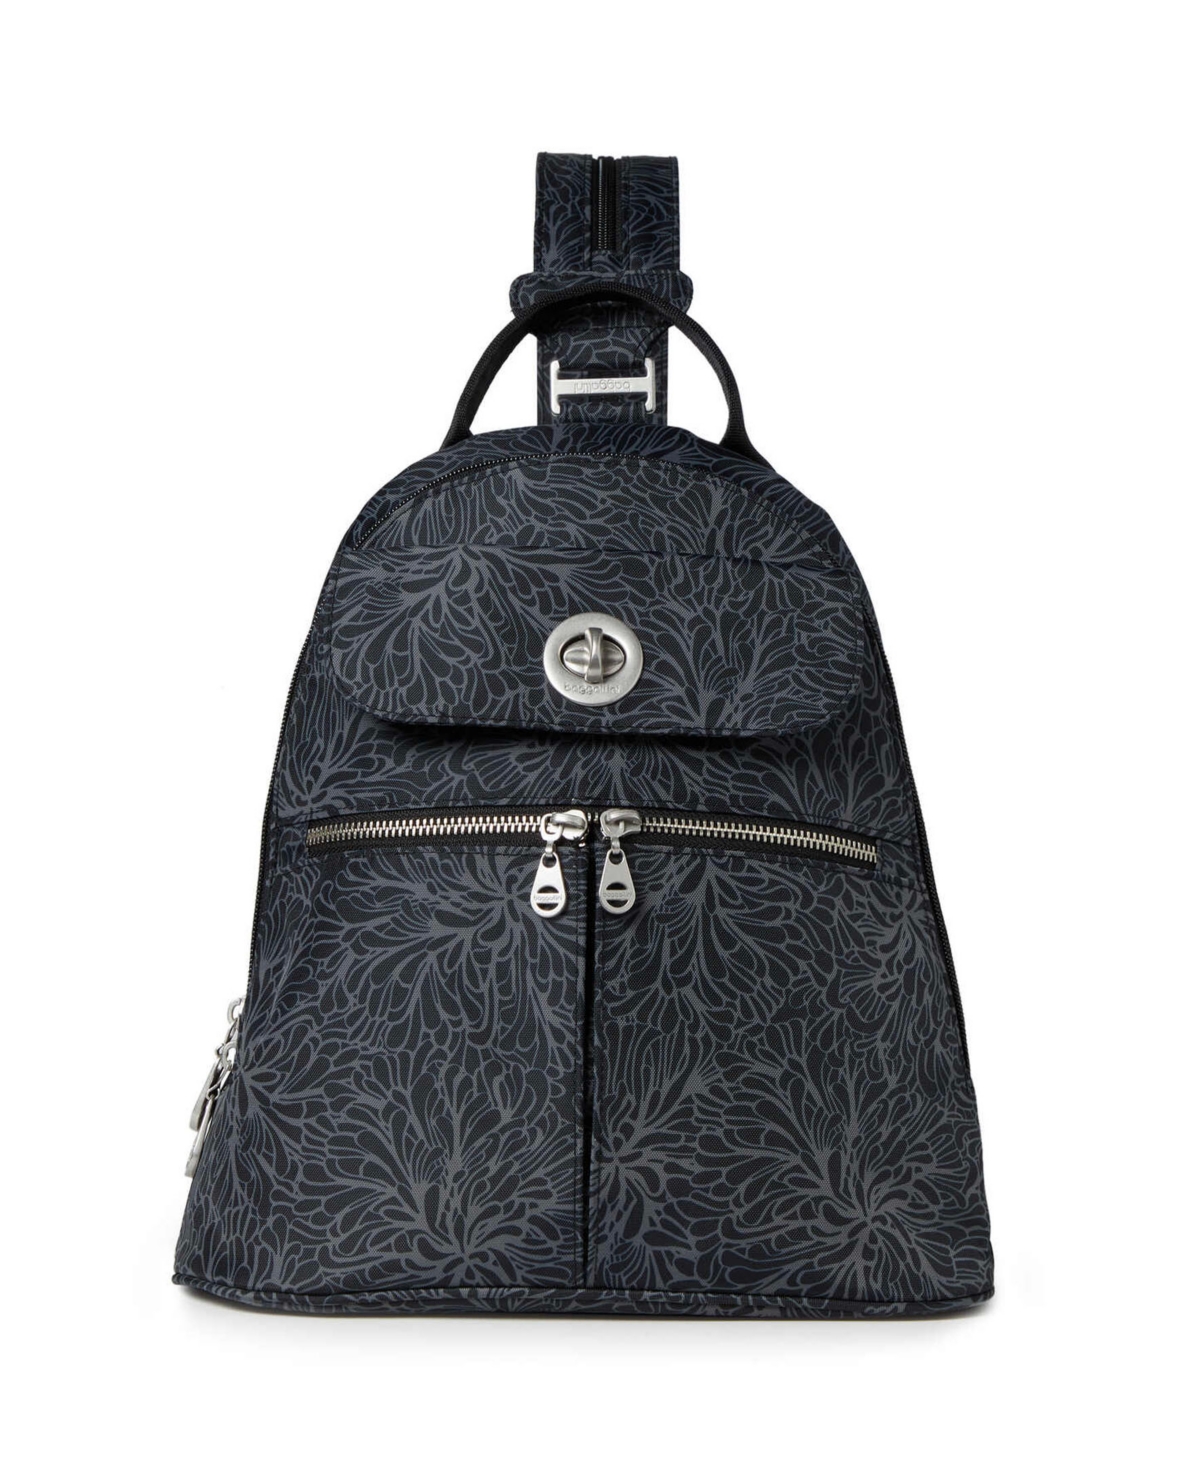 Naples Convertible Backpack - Midnight Blossom